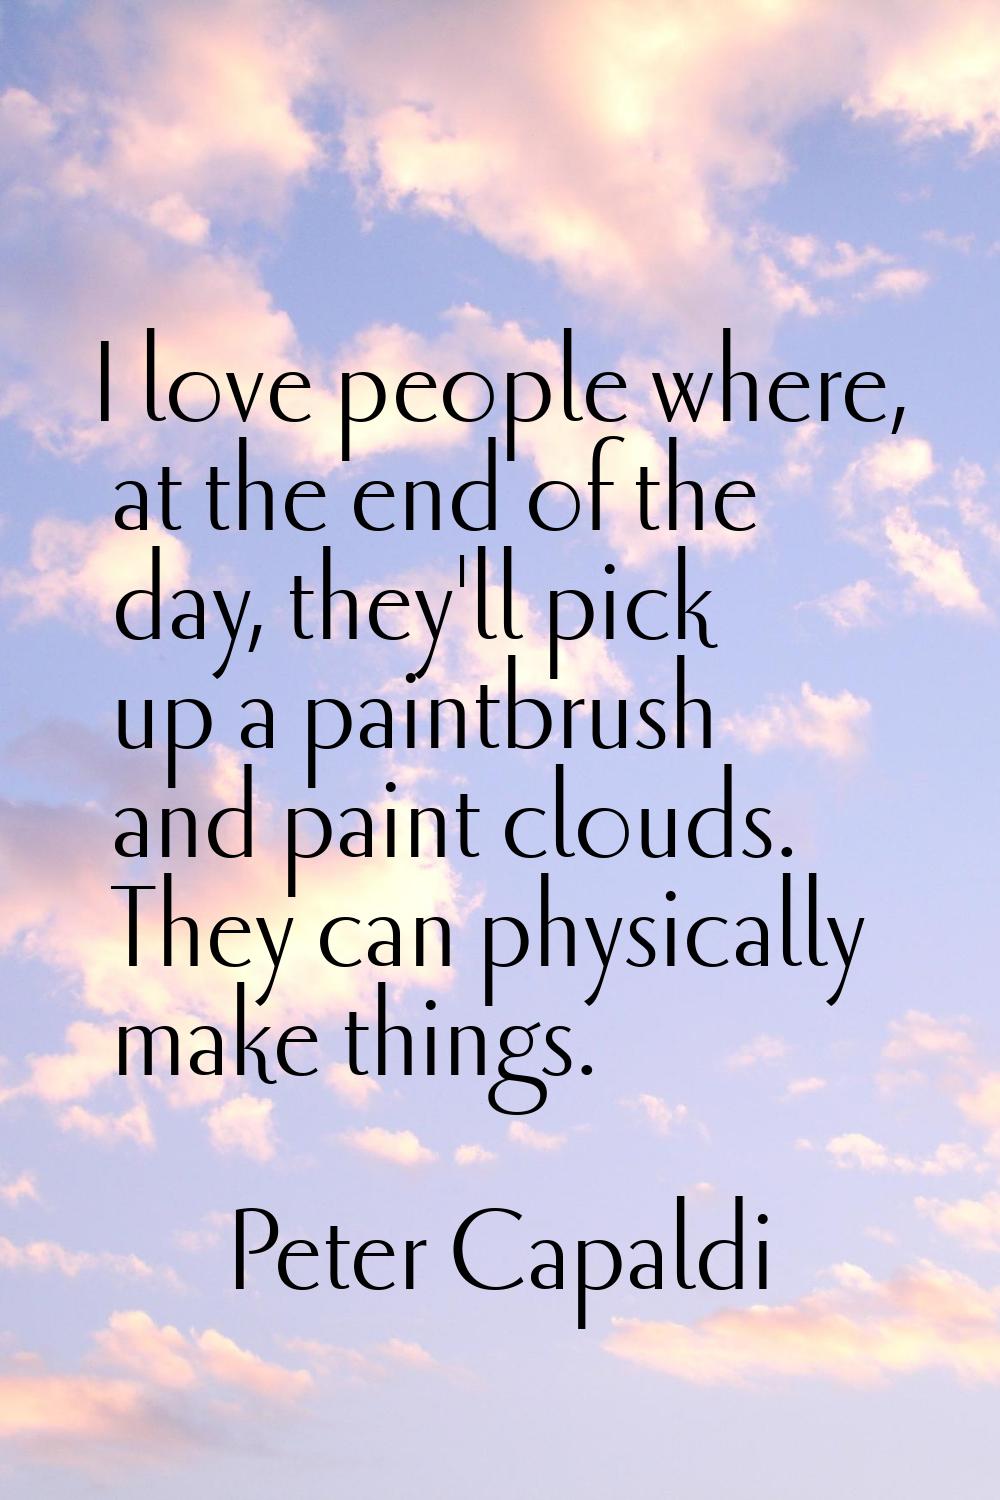 I love people where, at the end of the day, they'll pick up a paintbrush and paint clouds. They can